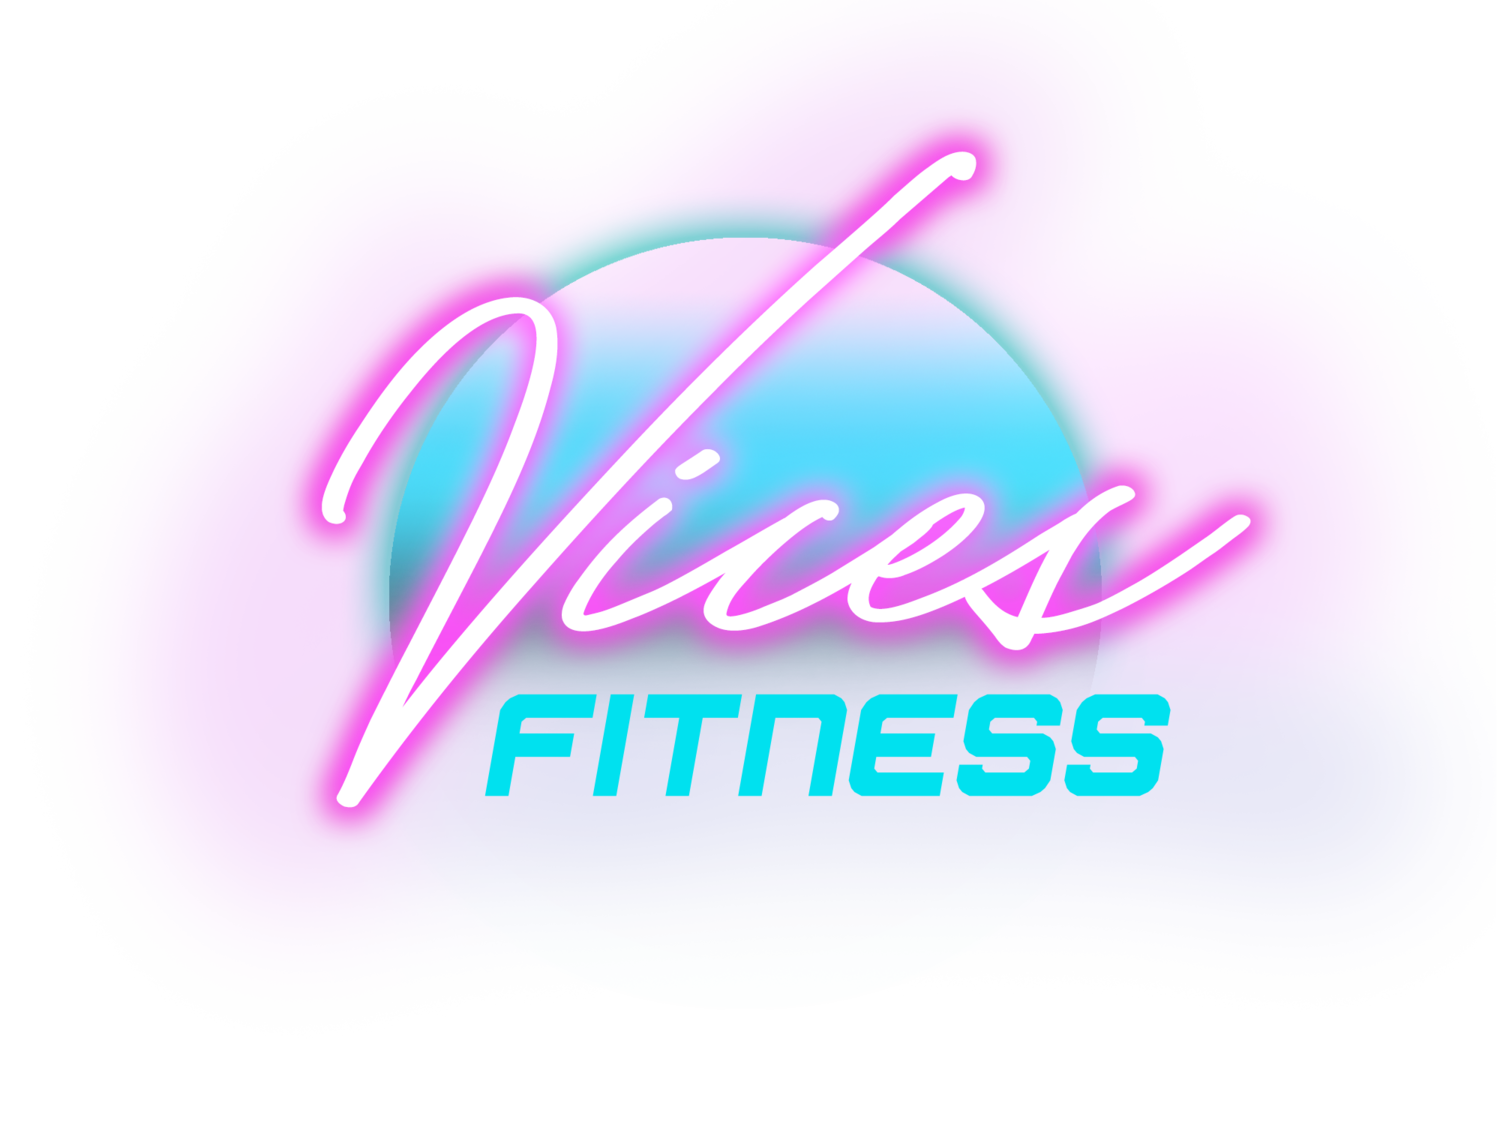 Vices+Fitness_11_3